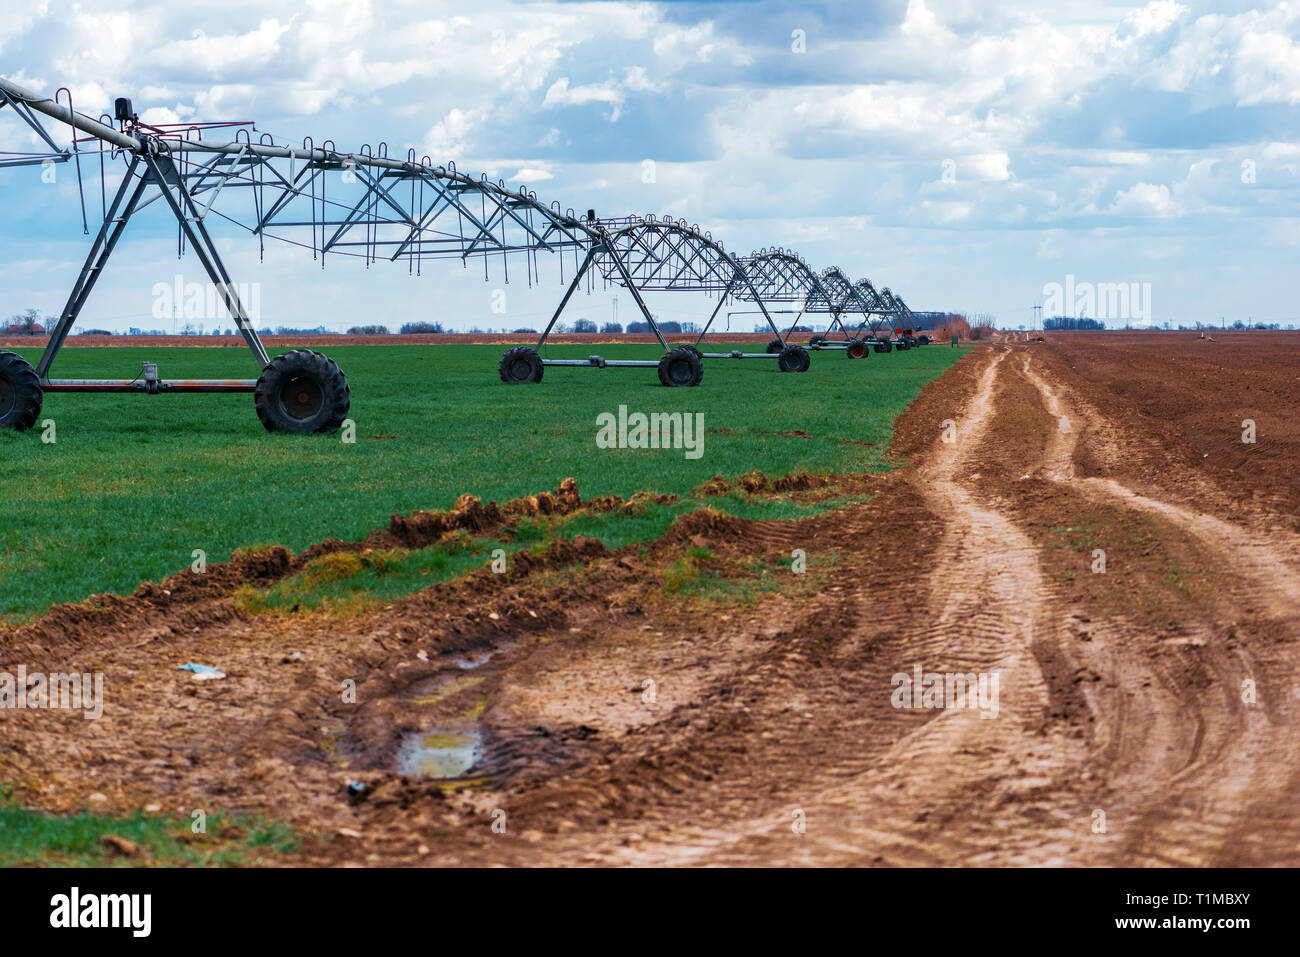 Center pivot irrigation system in cultivated wheat crop agricultural field Stock Photo